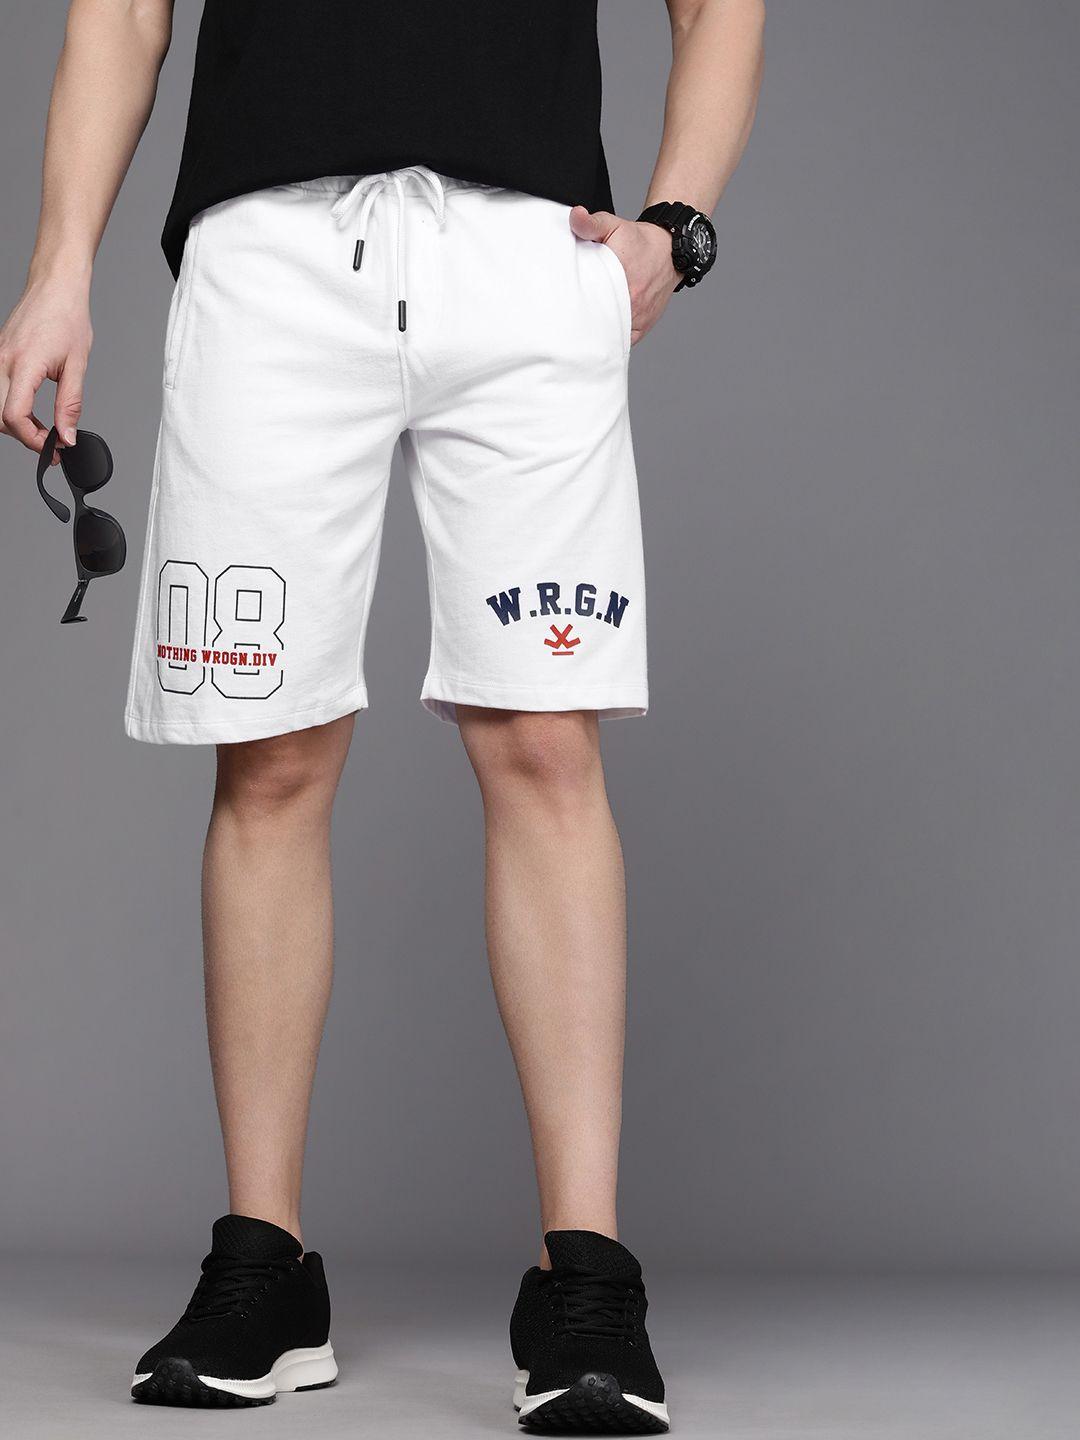 wrogn men typography printed mid rise above knee shorts